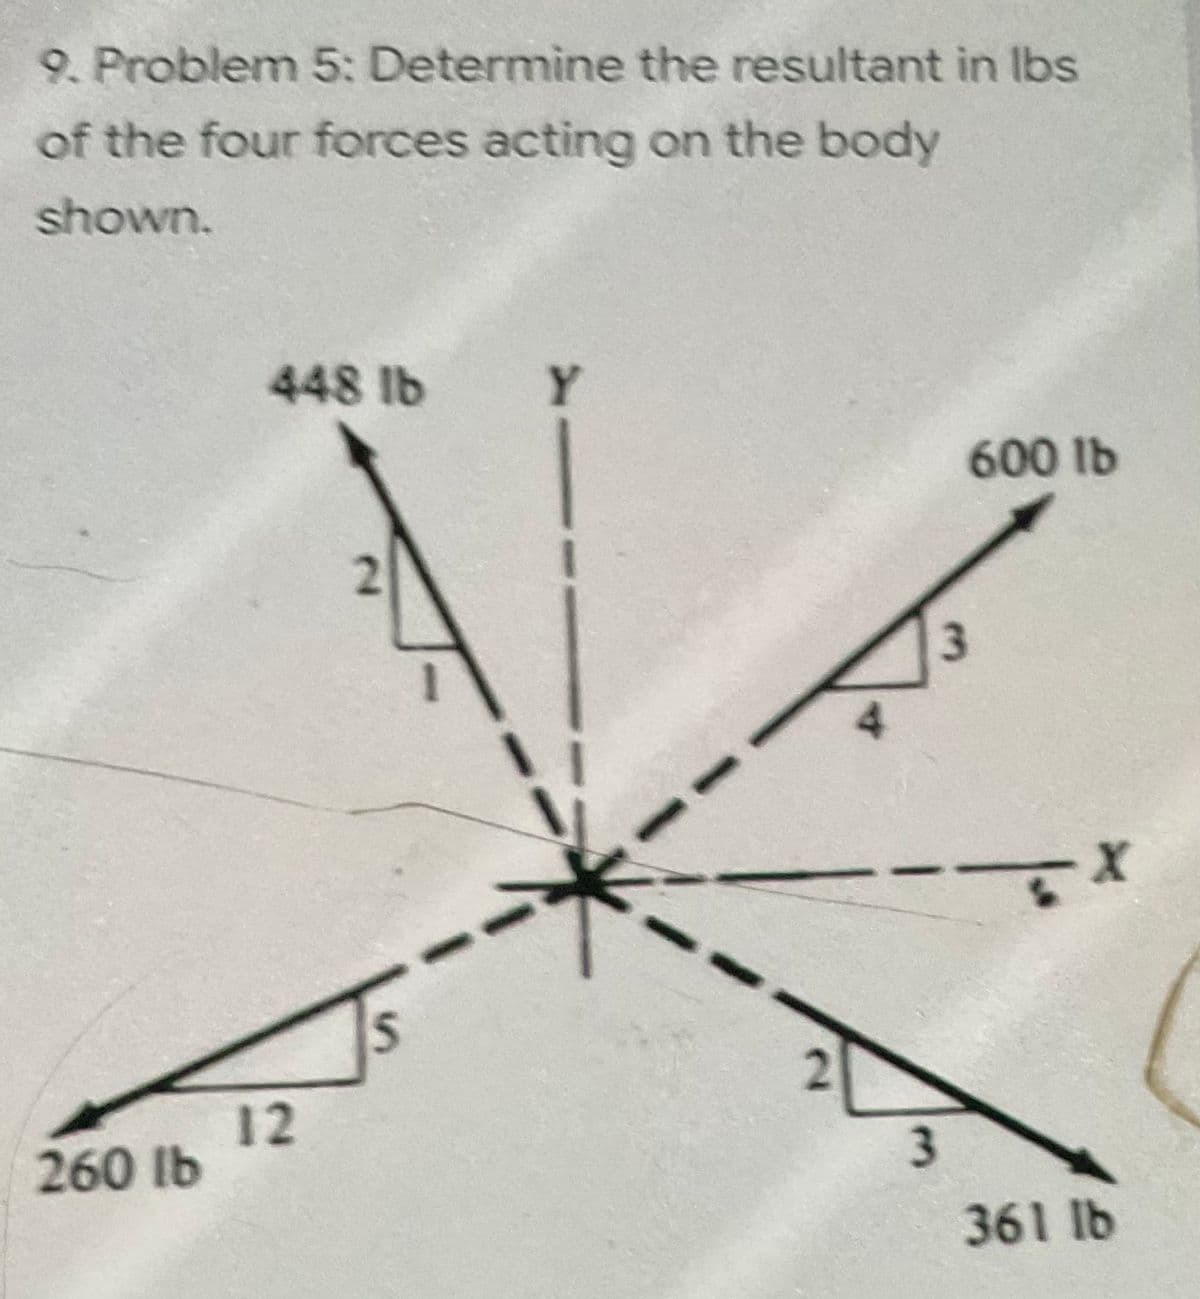 9. Problem 5: Determine the resultant in Ibs
of the four forces acting on the body
shown.
448 lb
Y.
600 lb
4.
12
260 lb
361 lb
